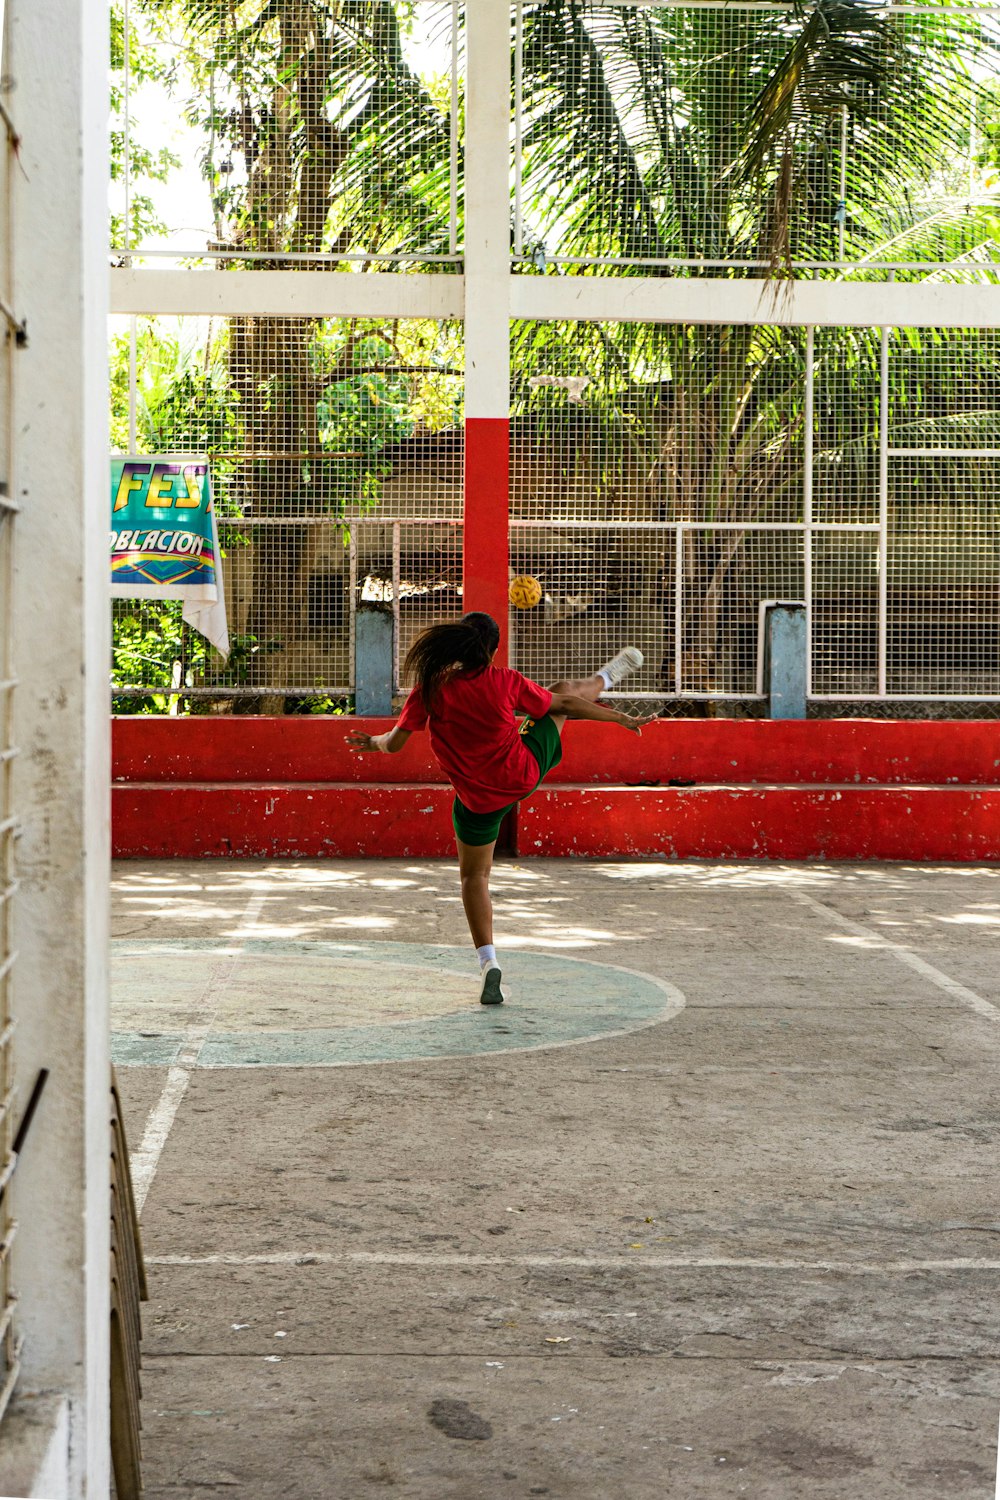 man in red shirt and black shorts playing basketball during daytime